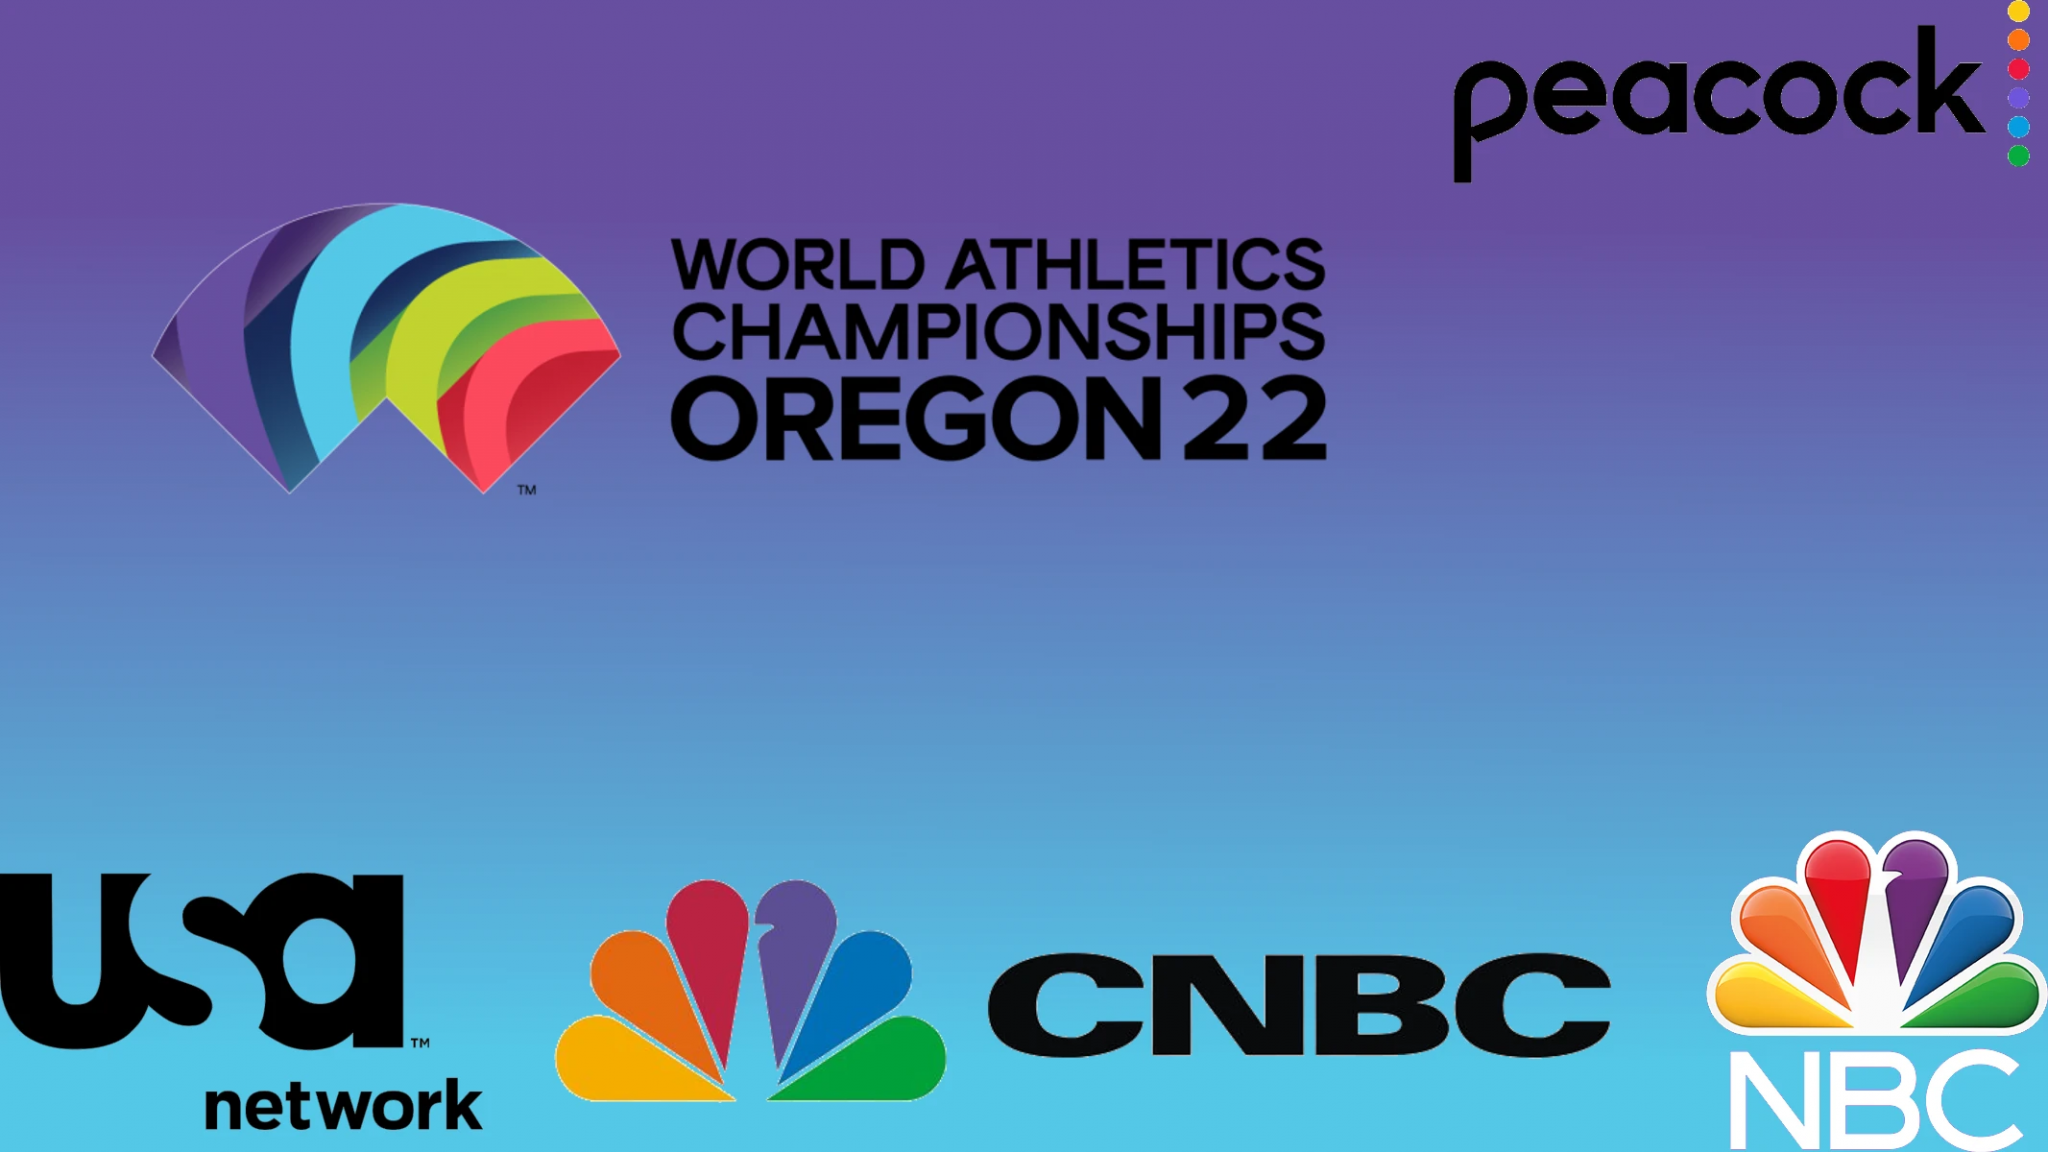 The 2022 World Athletics Championships in Eugene was the most watched in US television history but viewing figures in Europe were disappointing ©NBC